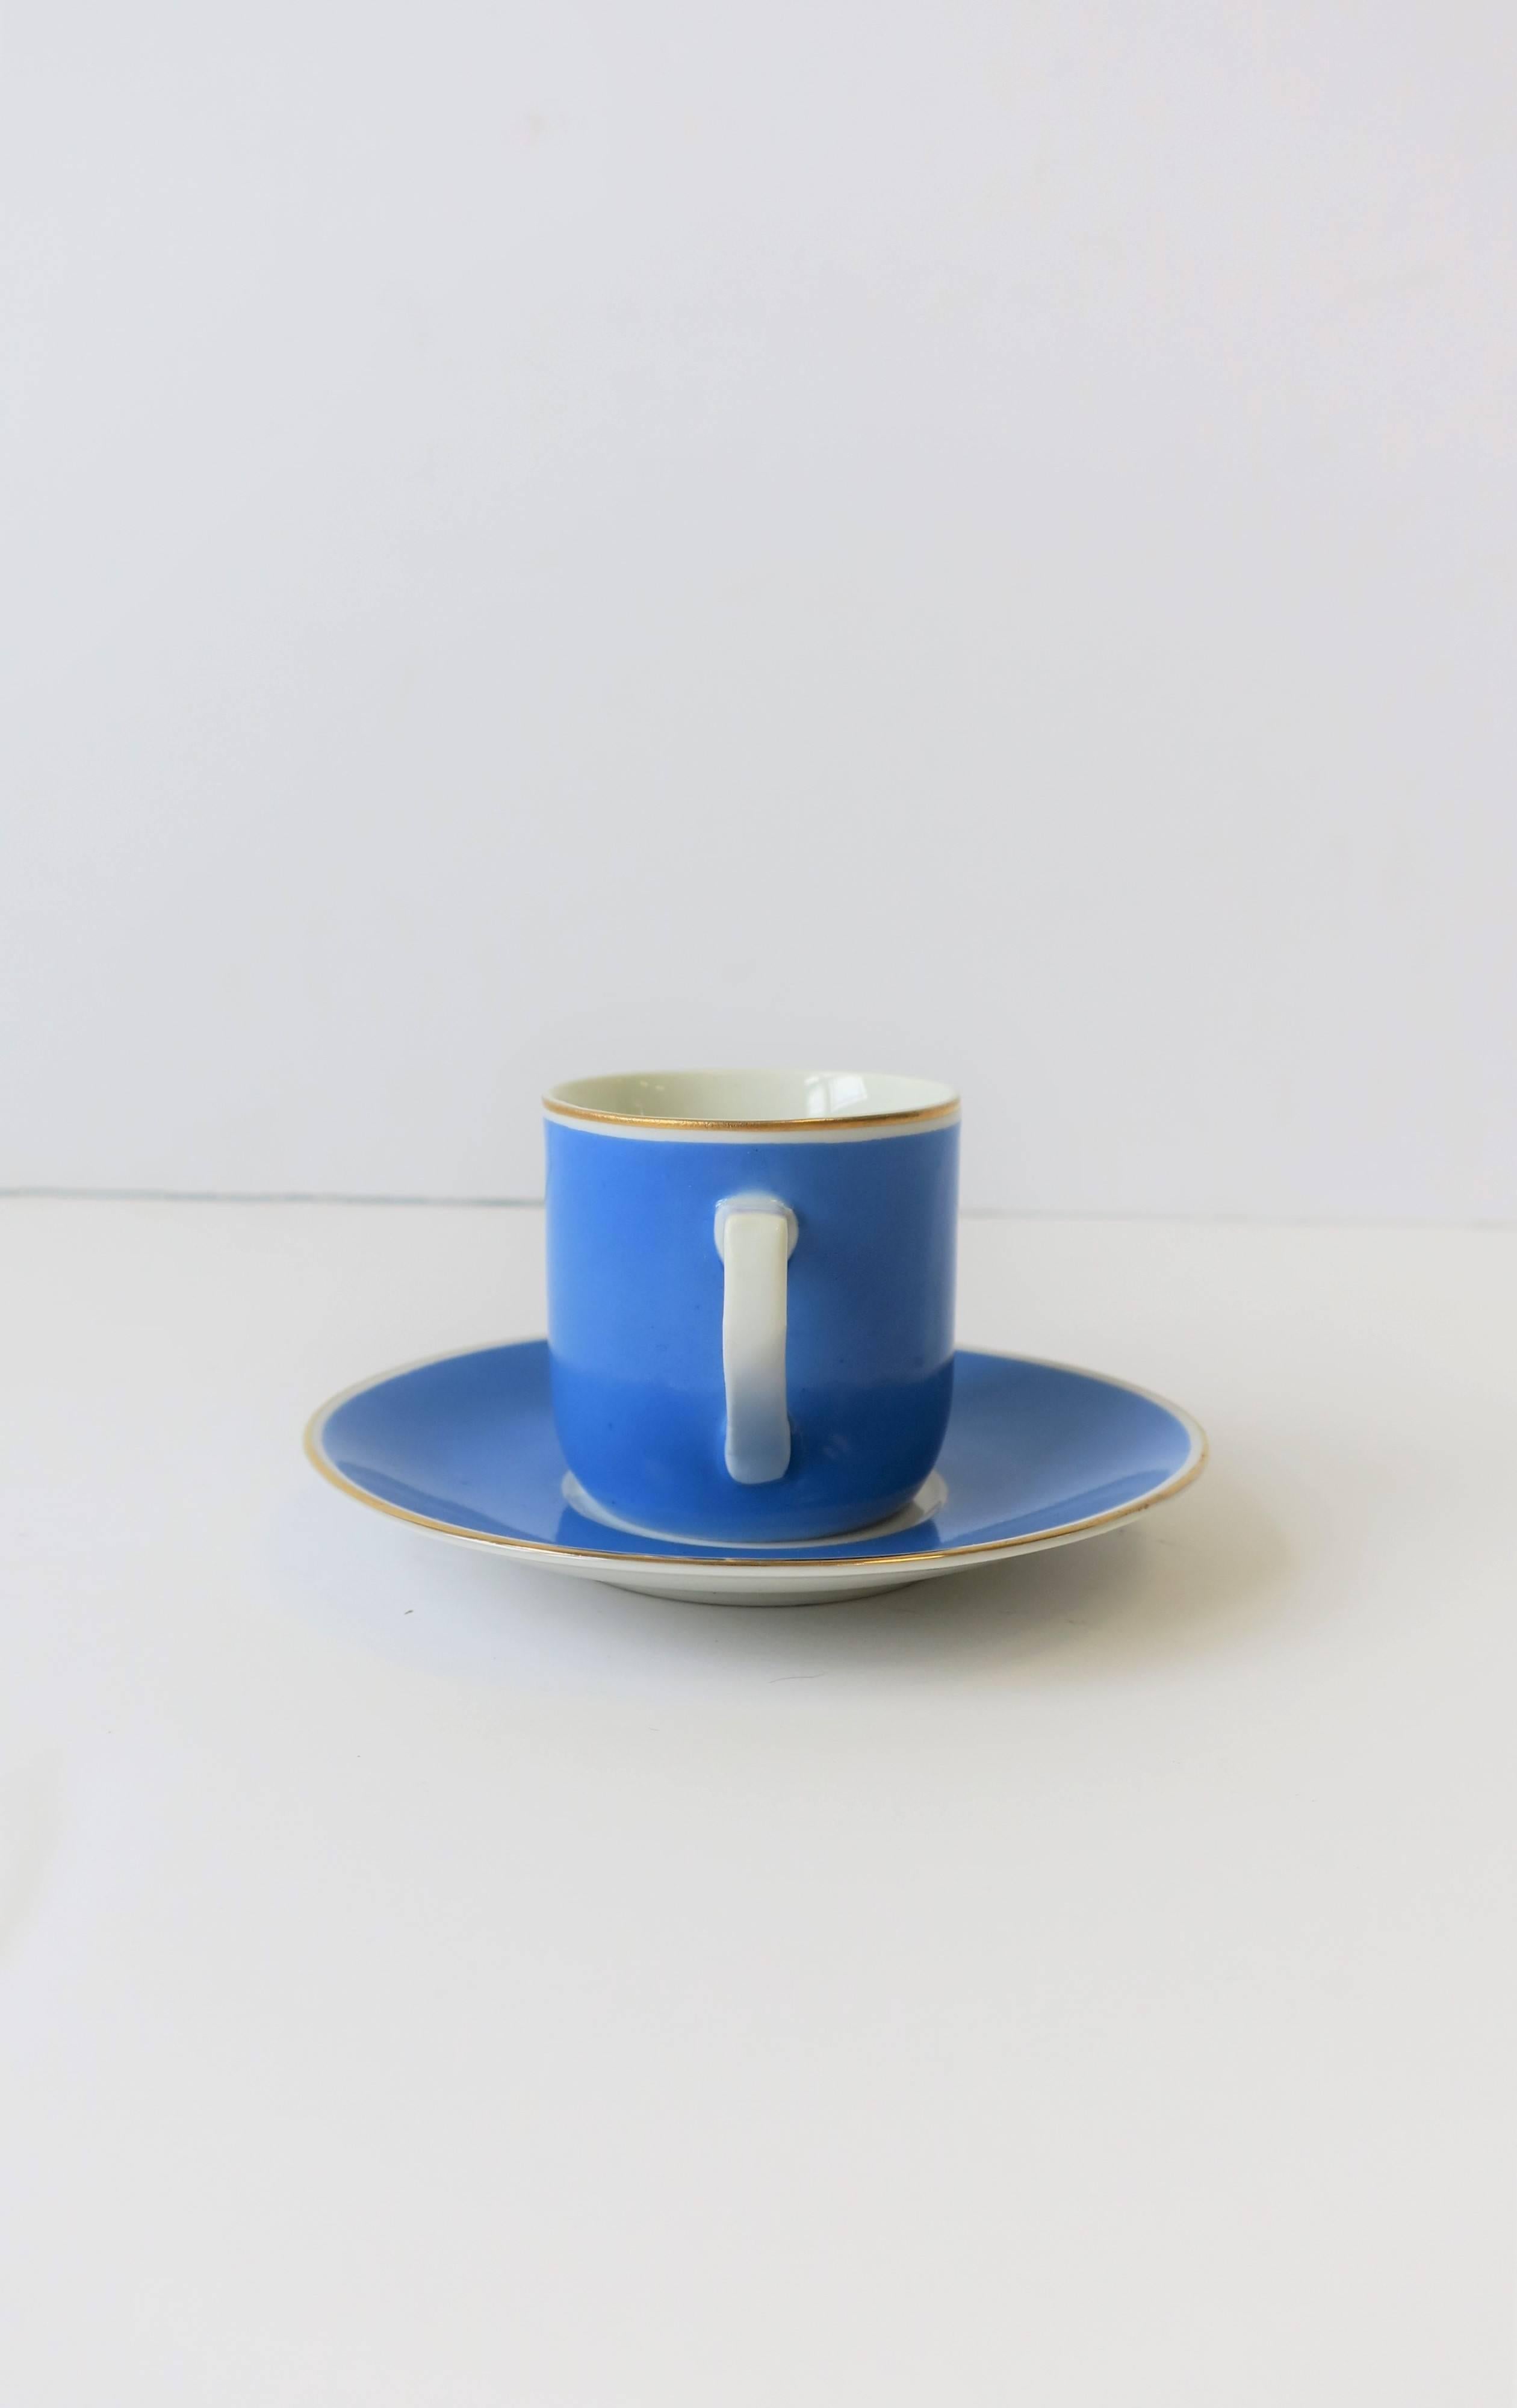 Mid-20th Century German Porcelain Blue and White Espresso Coffee Cup 